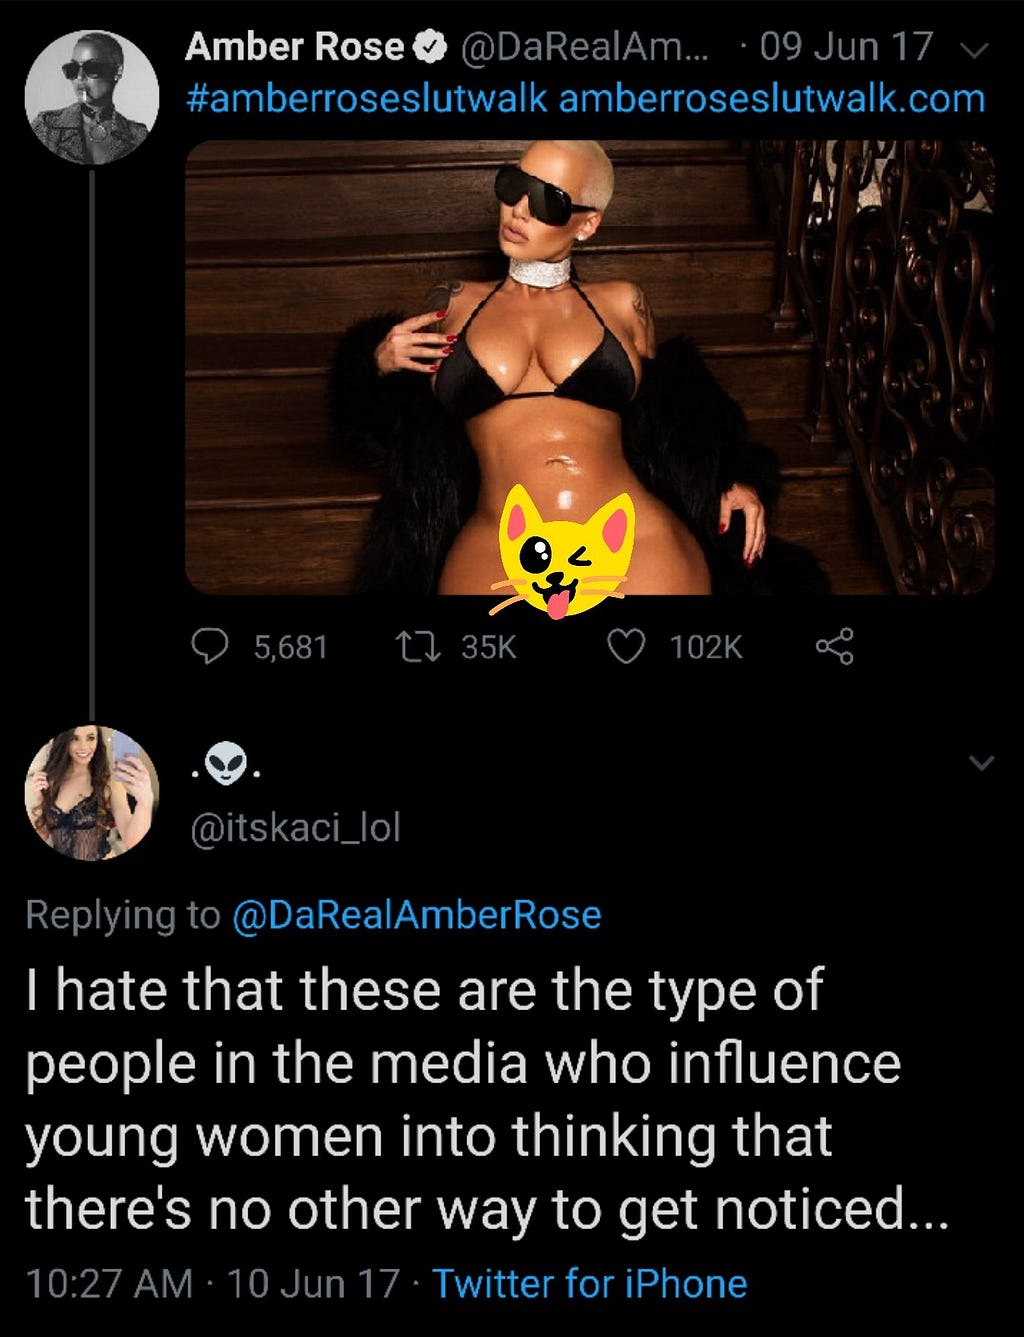 A woman’s negative and anti-feminist reply to Amber Rose’s tweet of herself mostly nude in order to promote her Slut-Walk.